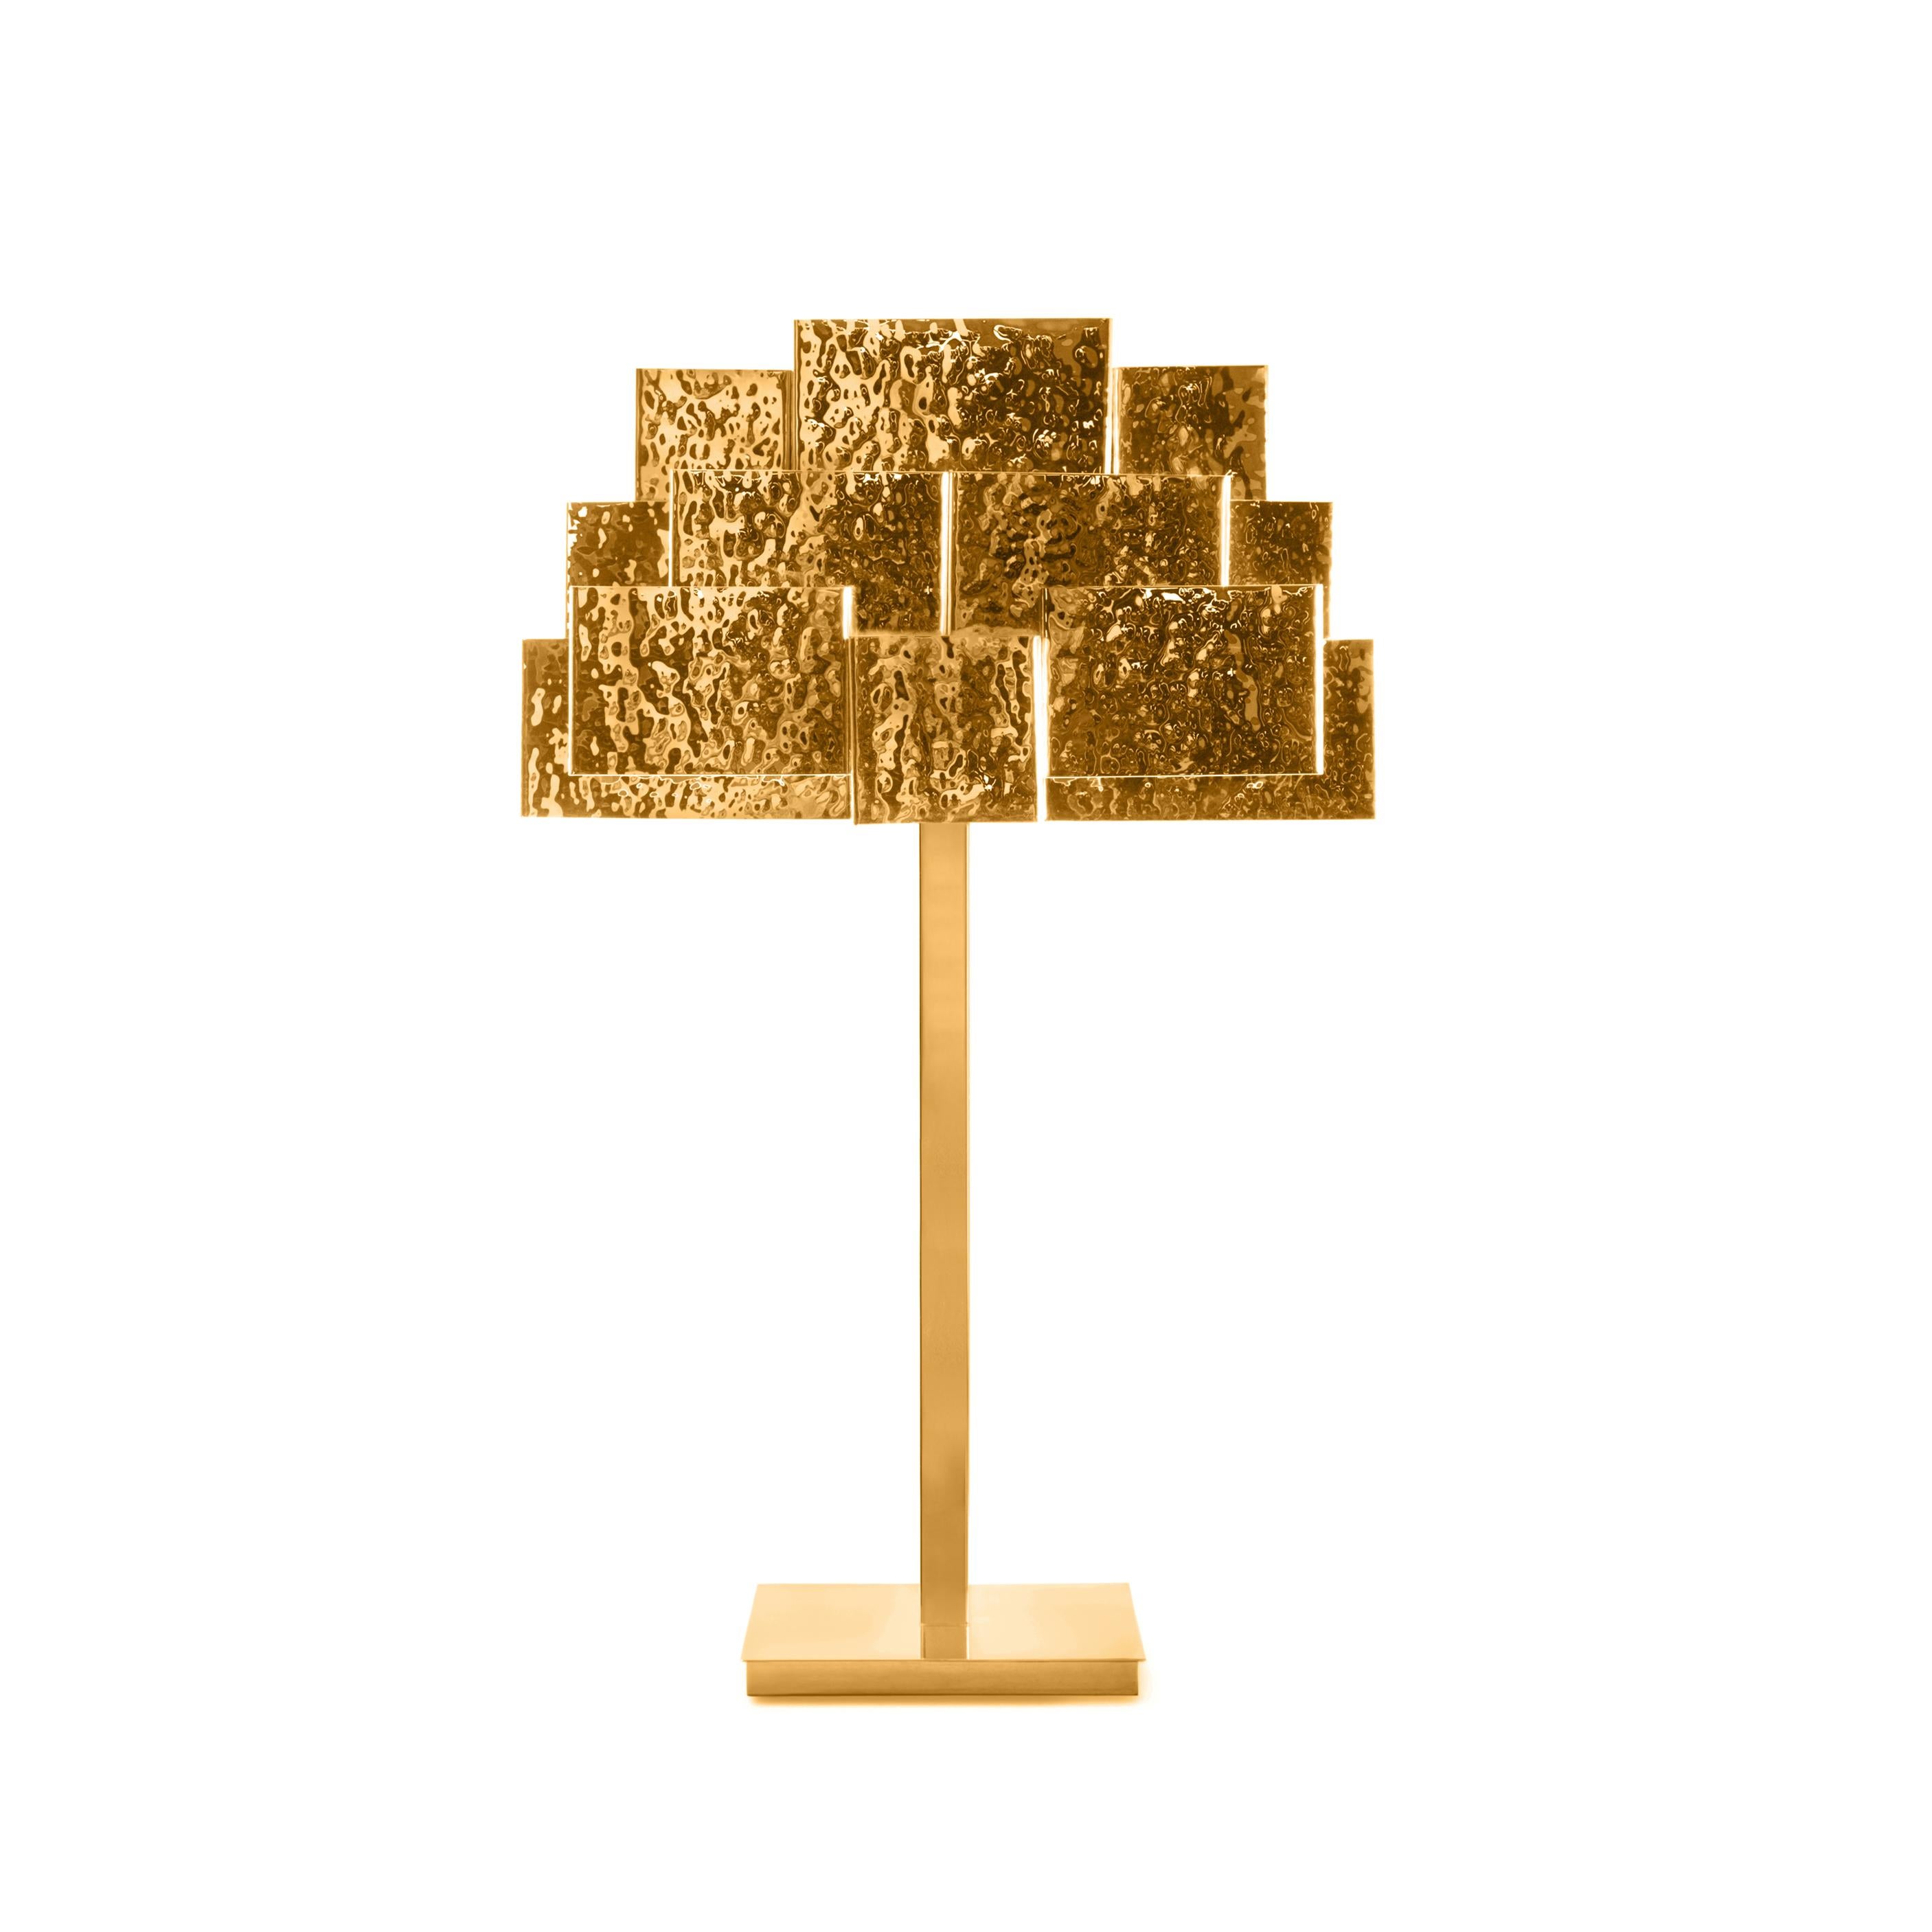 Inspiring trees recreates a treetop and is fully handcrafted. The rays of light pierce the geometric design in an unexpected way; almost ethereal.
Slender and seemingly minimal, inspiring trees is a lighting piece that carries form, image and